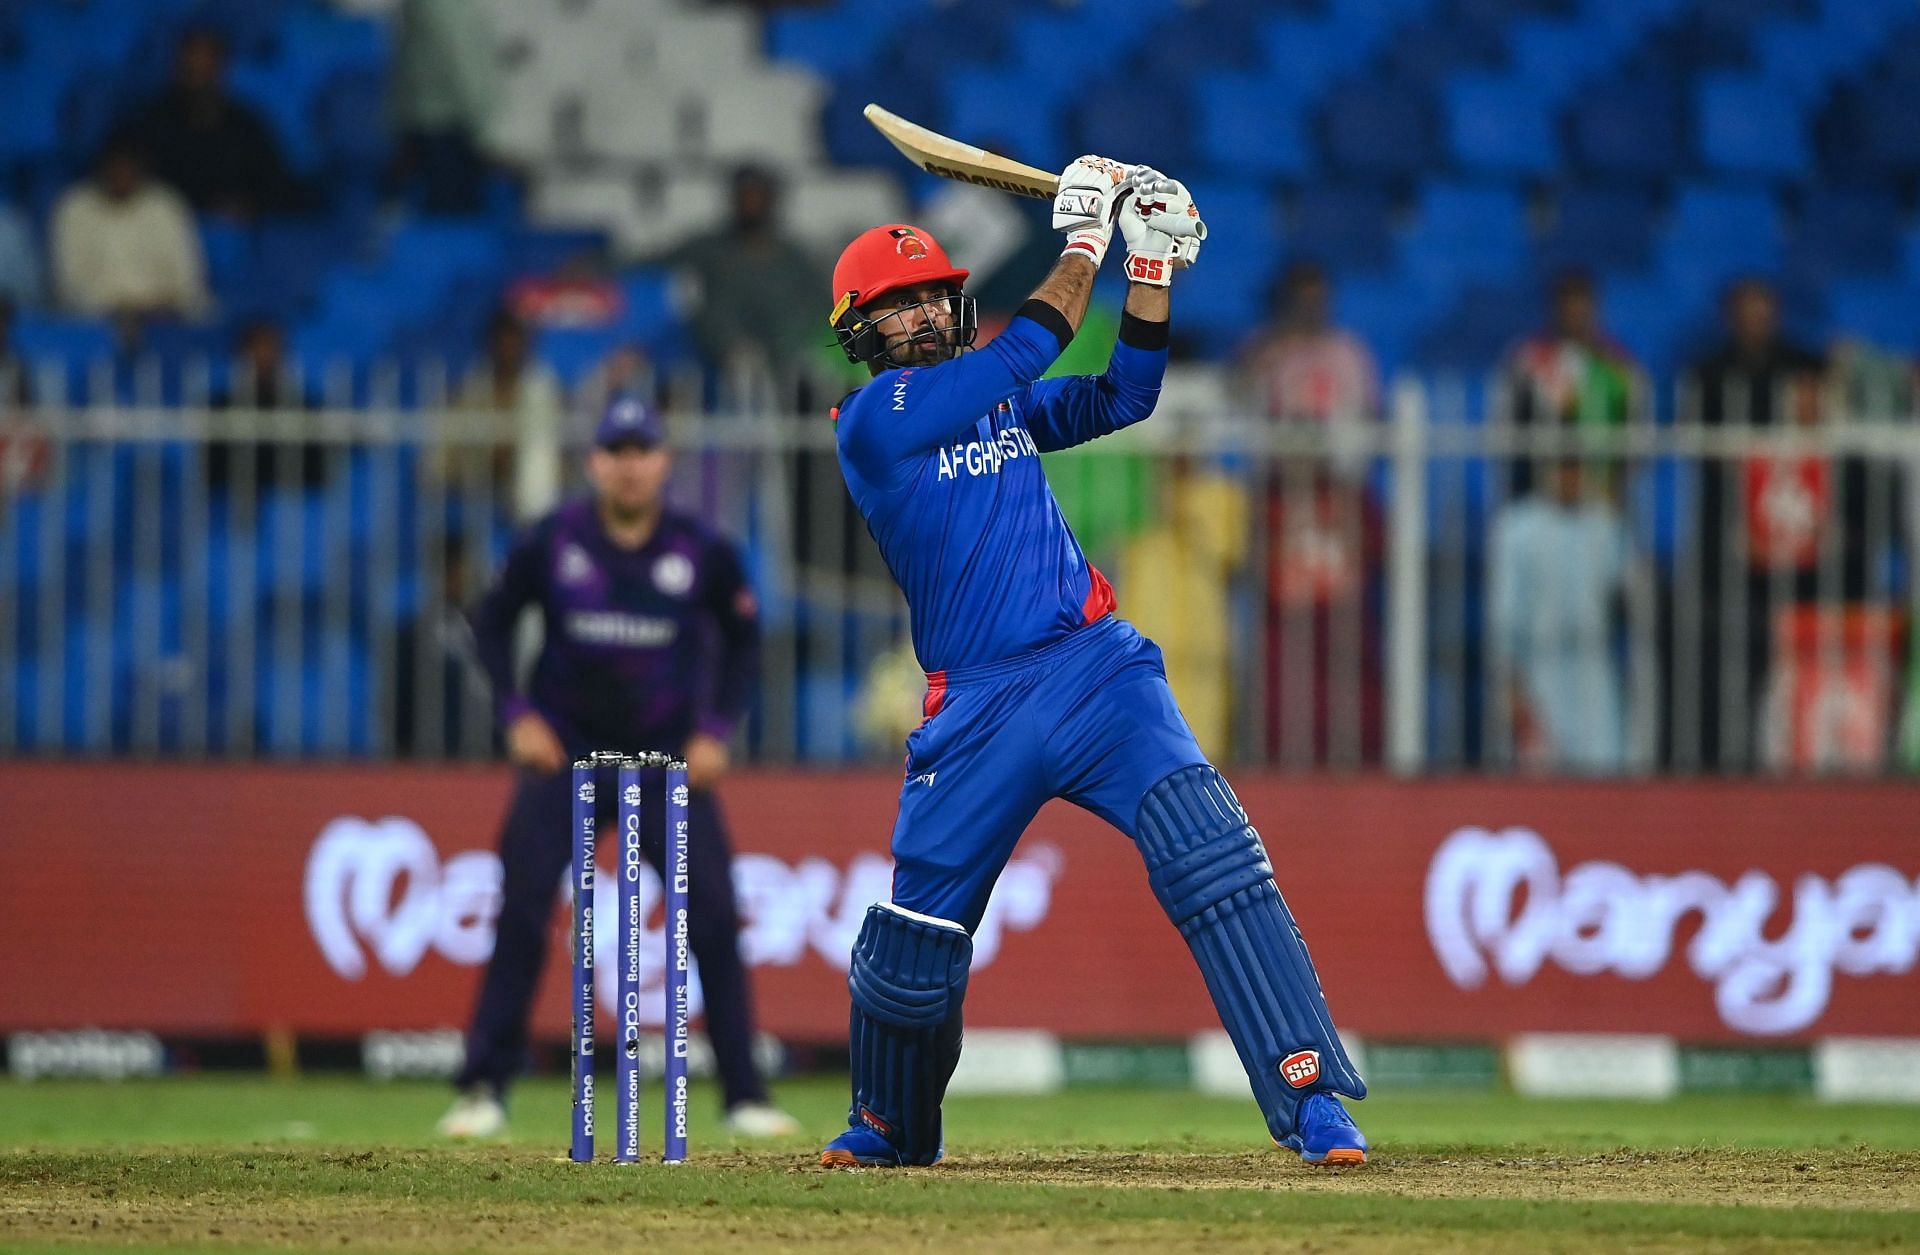 Mohammad Nabi will be a key player for Afghanistan (Credit: Getty Images)